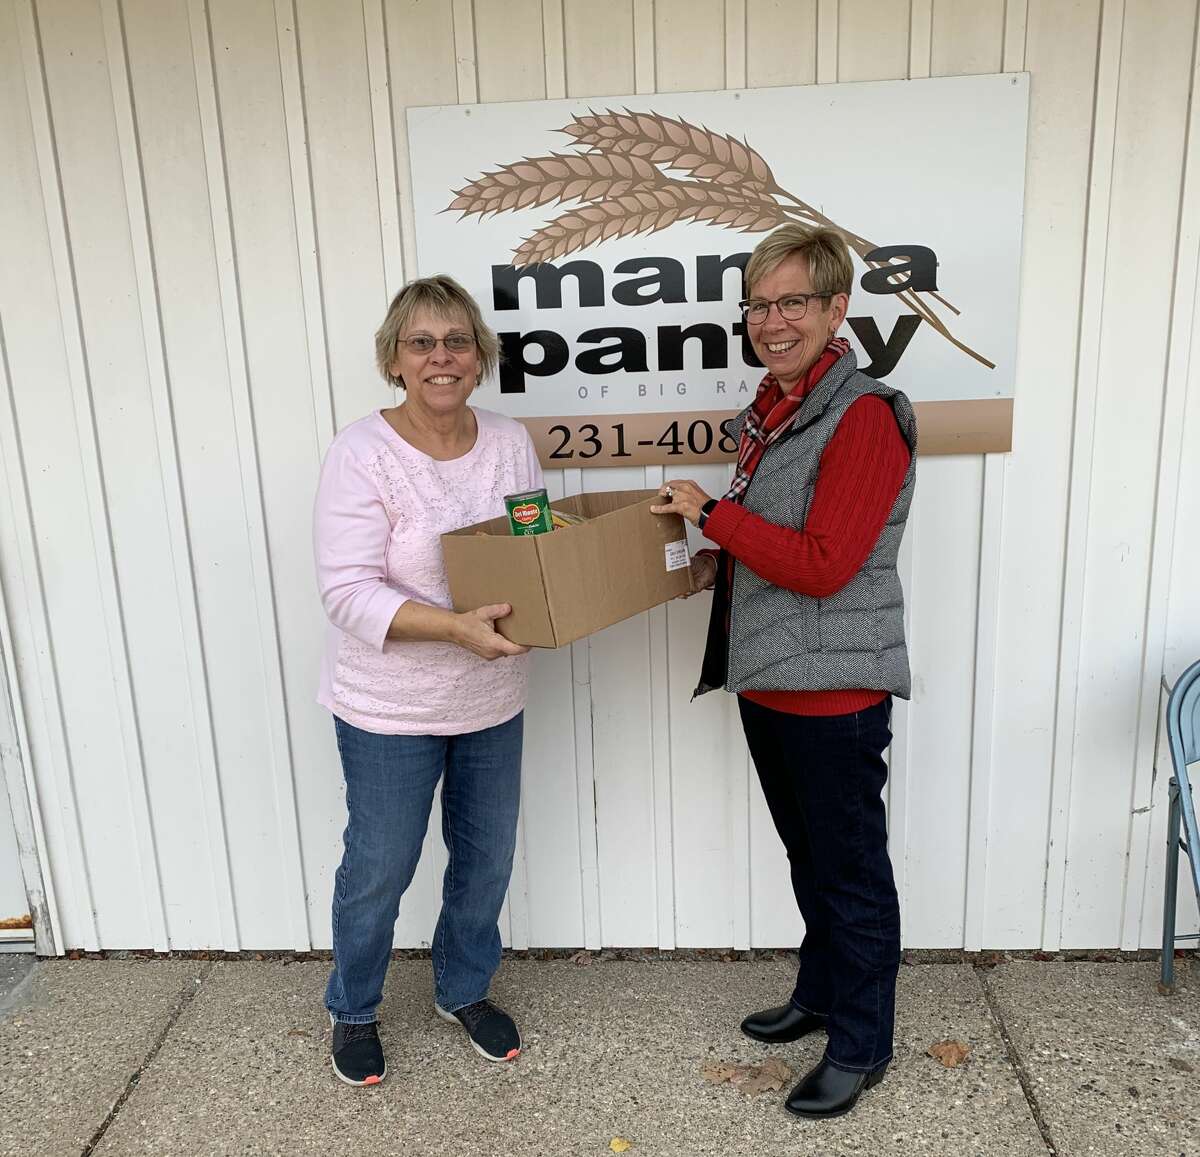 The Manna Pantry of Big Rapids and St. Peter’s Lutheran Church are teaming up this year to provide a community Thanksgiving dinner. 